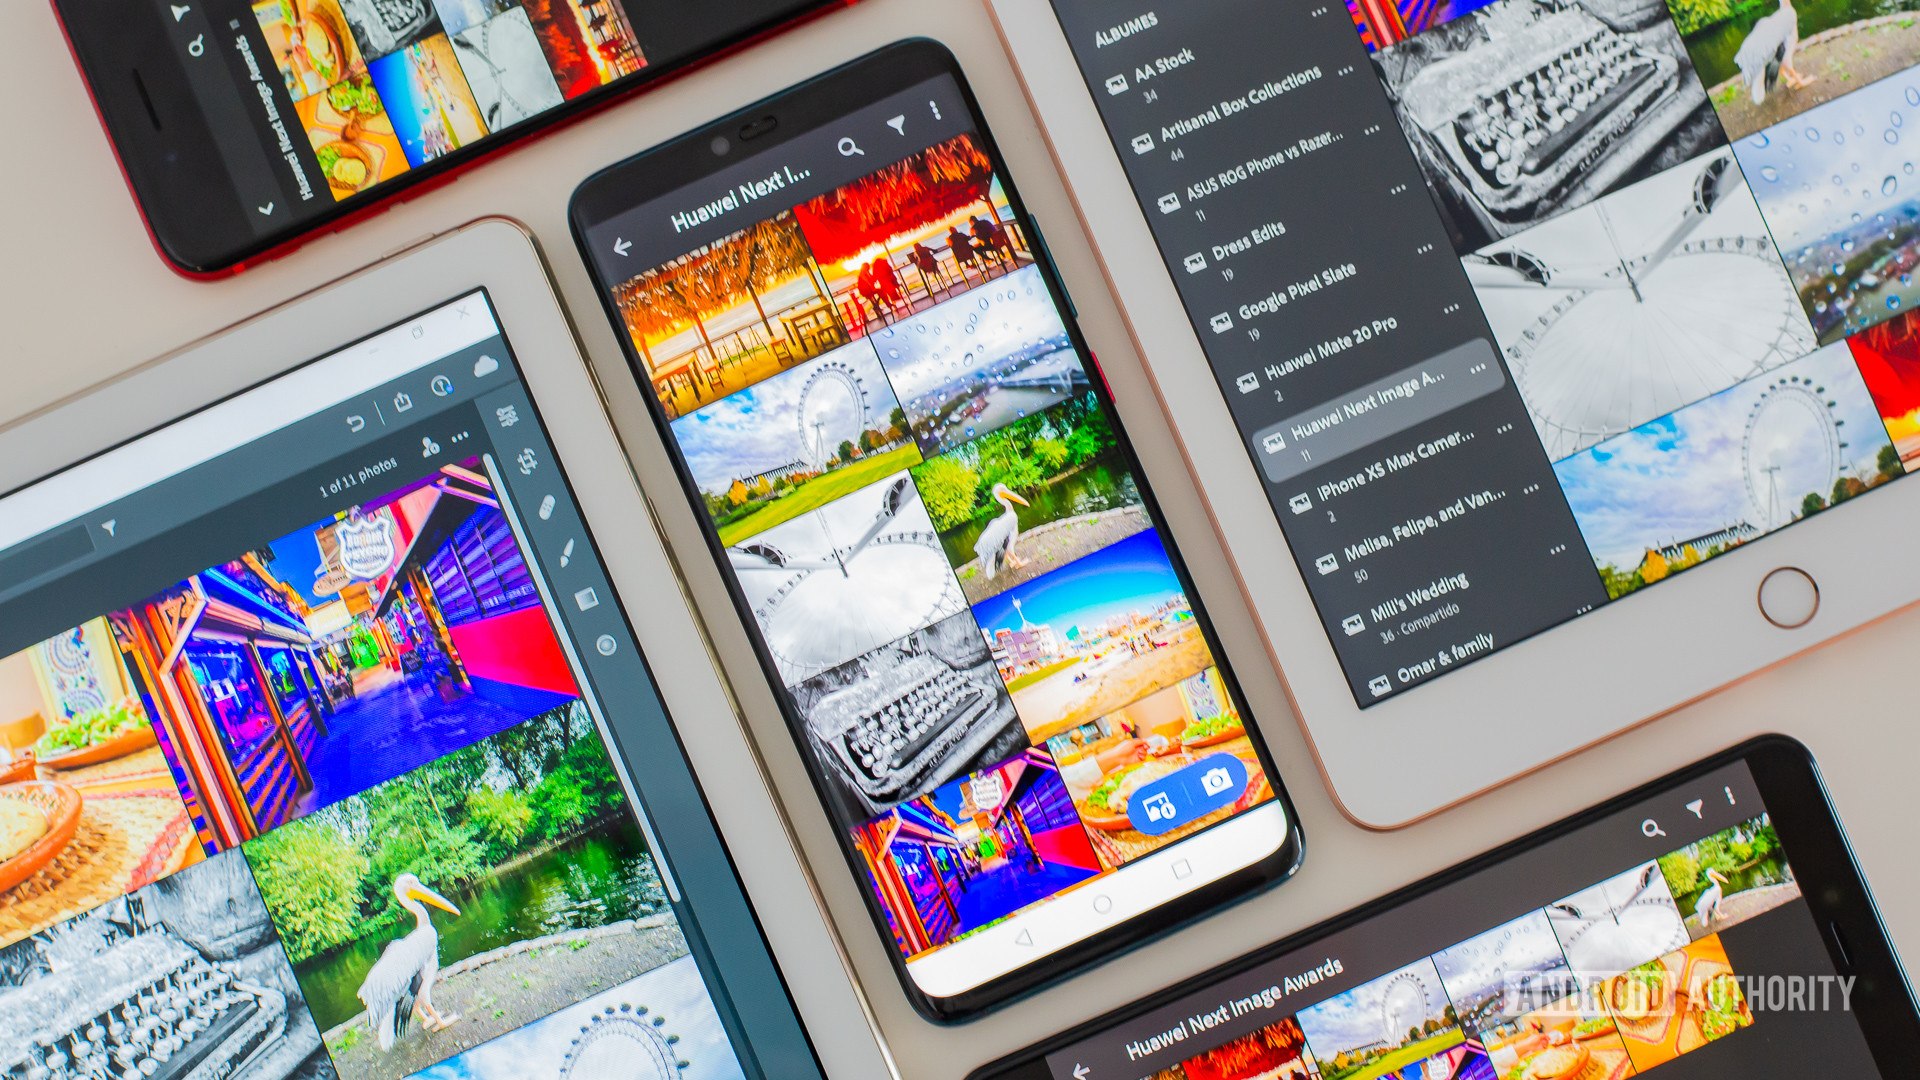 Adobe Lightroom Mobile is open on many devices.